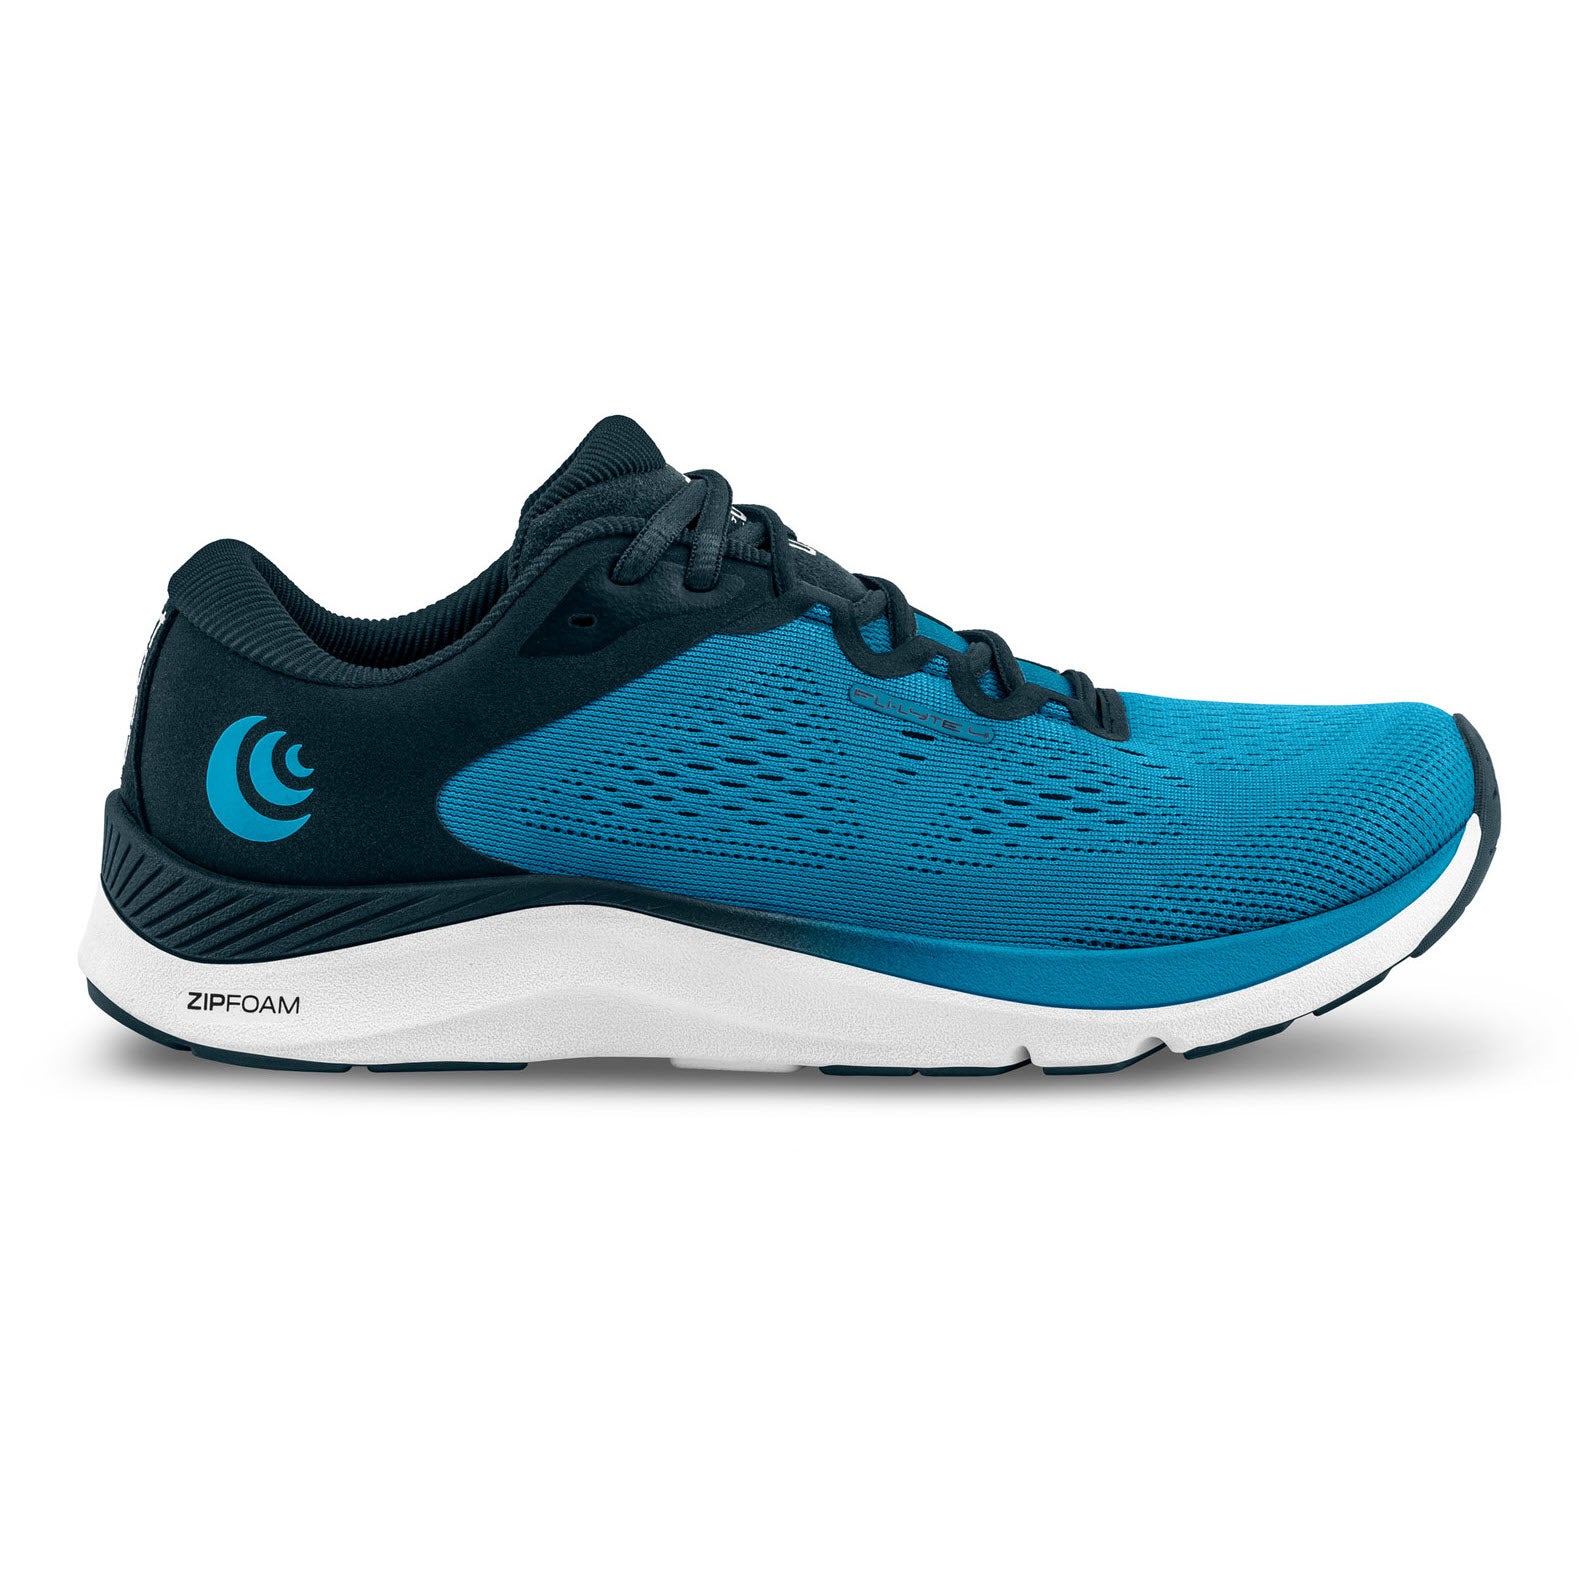 A single TOPO FLI-LYTE 4 BLUE/WHITE - MENS running shoe with a white sole and the brand's logo on the side.